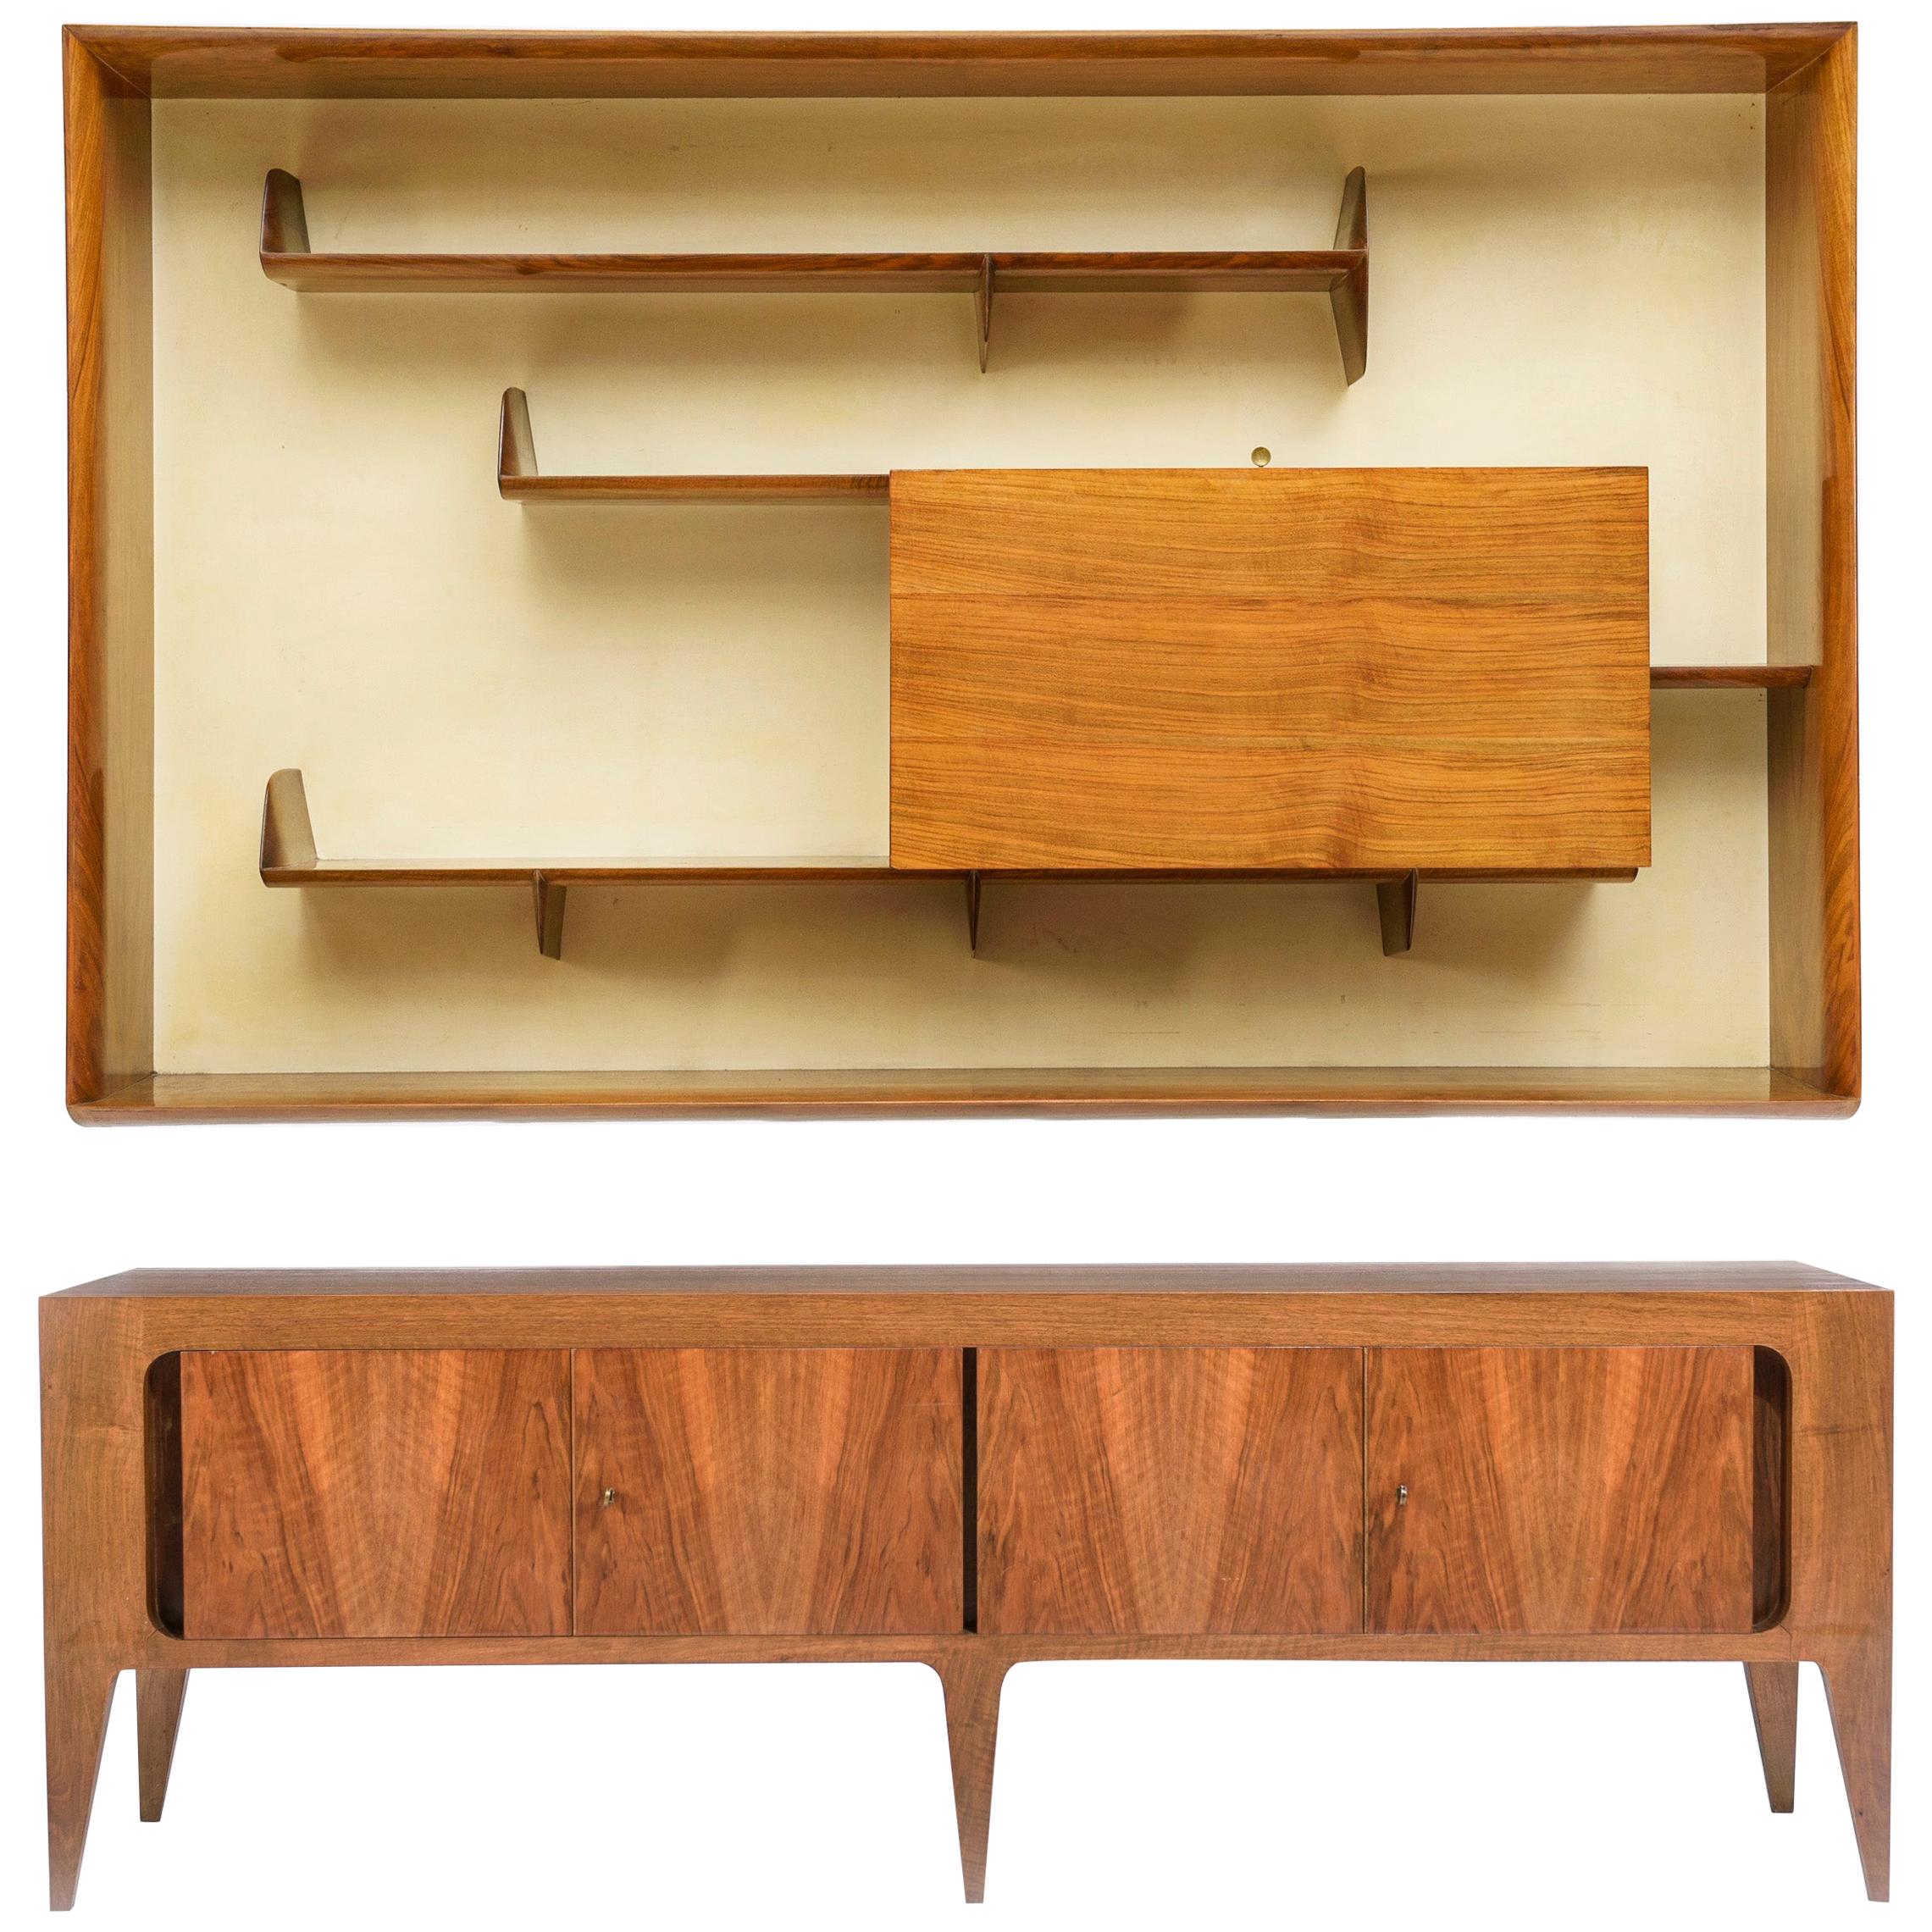 Rare Gio Ponti Hanging Cabinet and Sideboard 1951 Singer & Sons